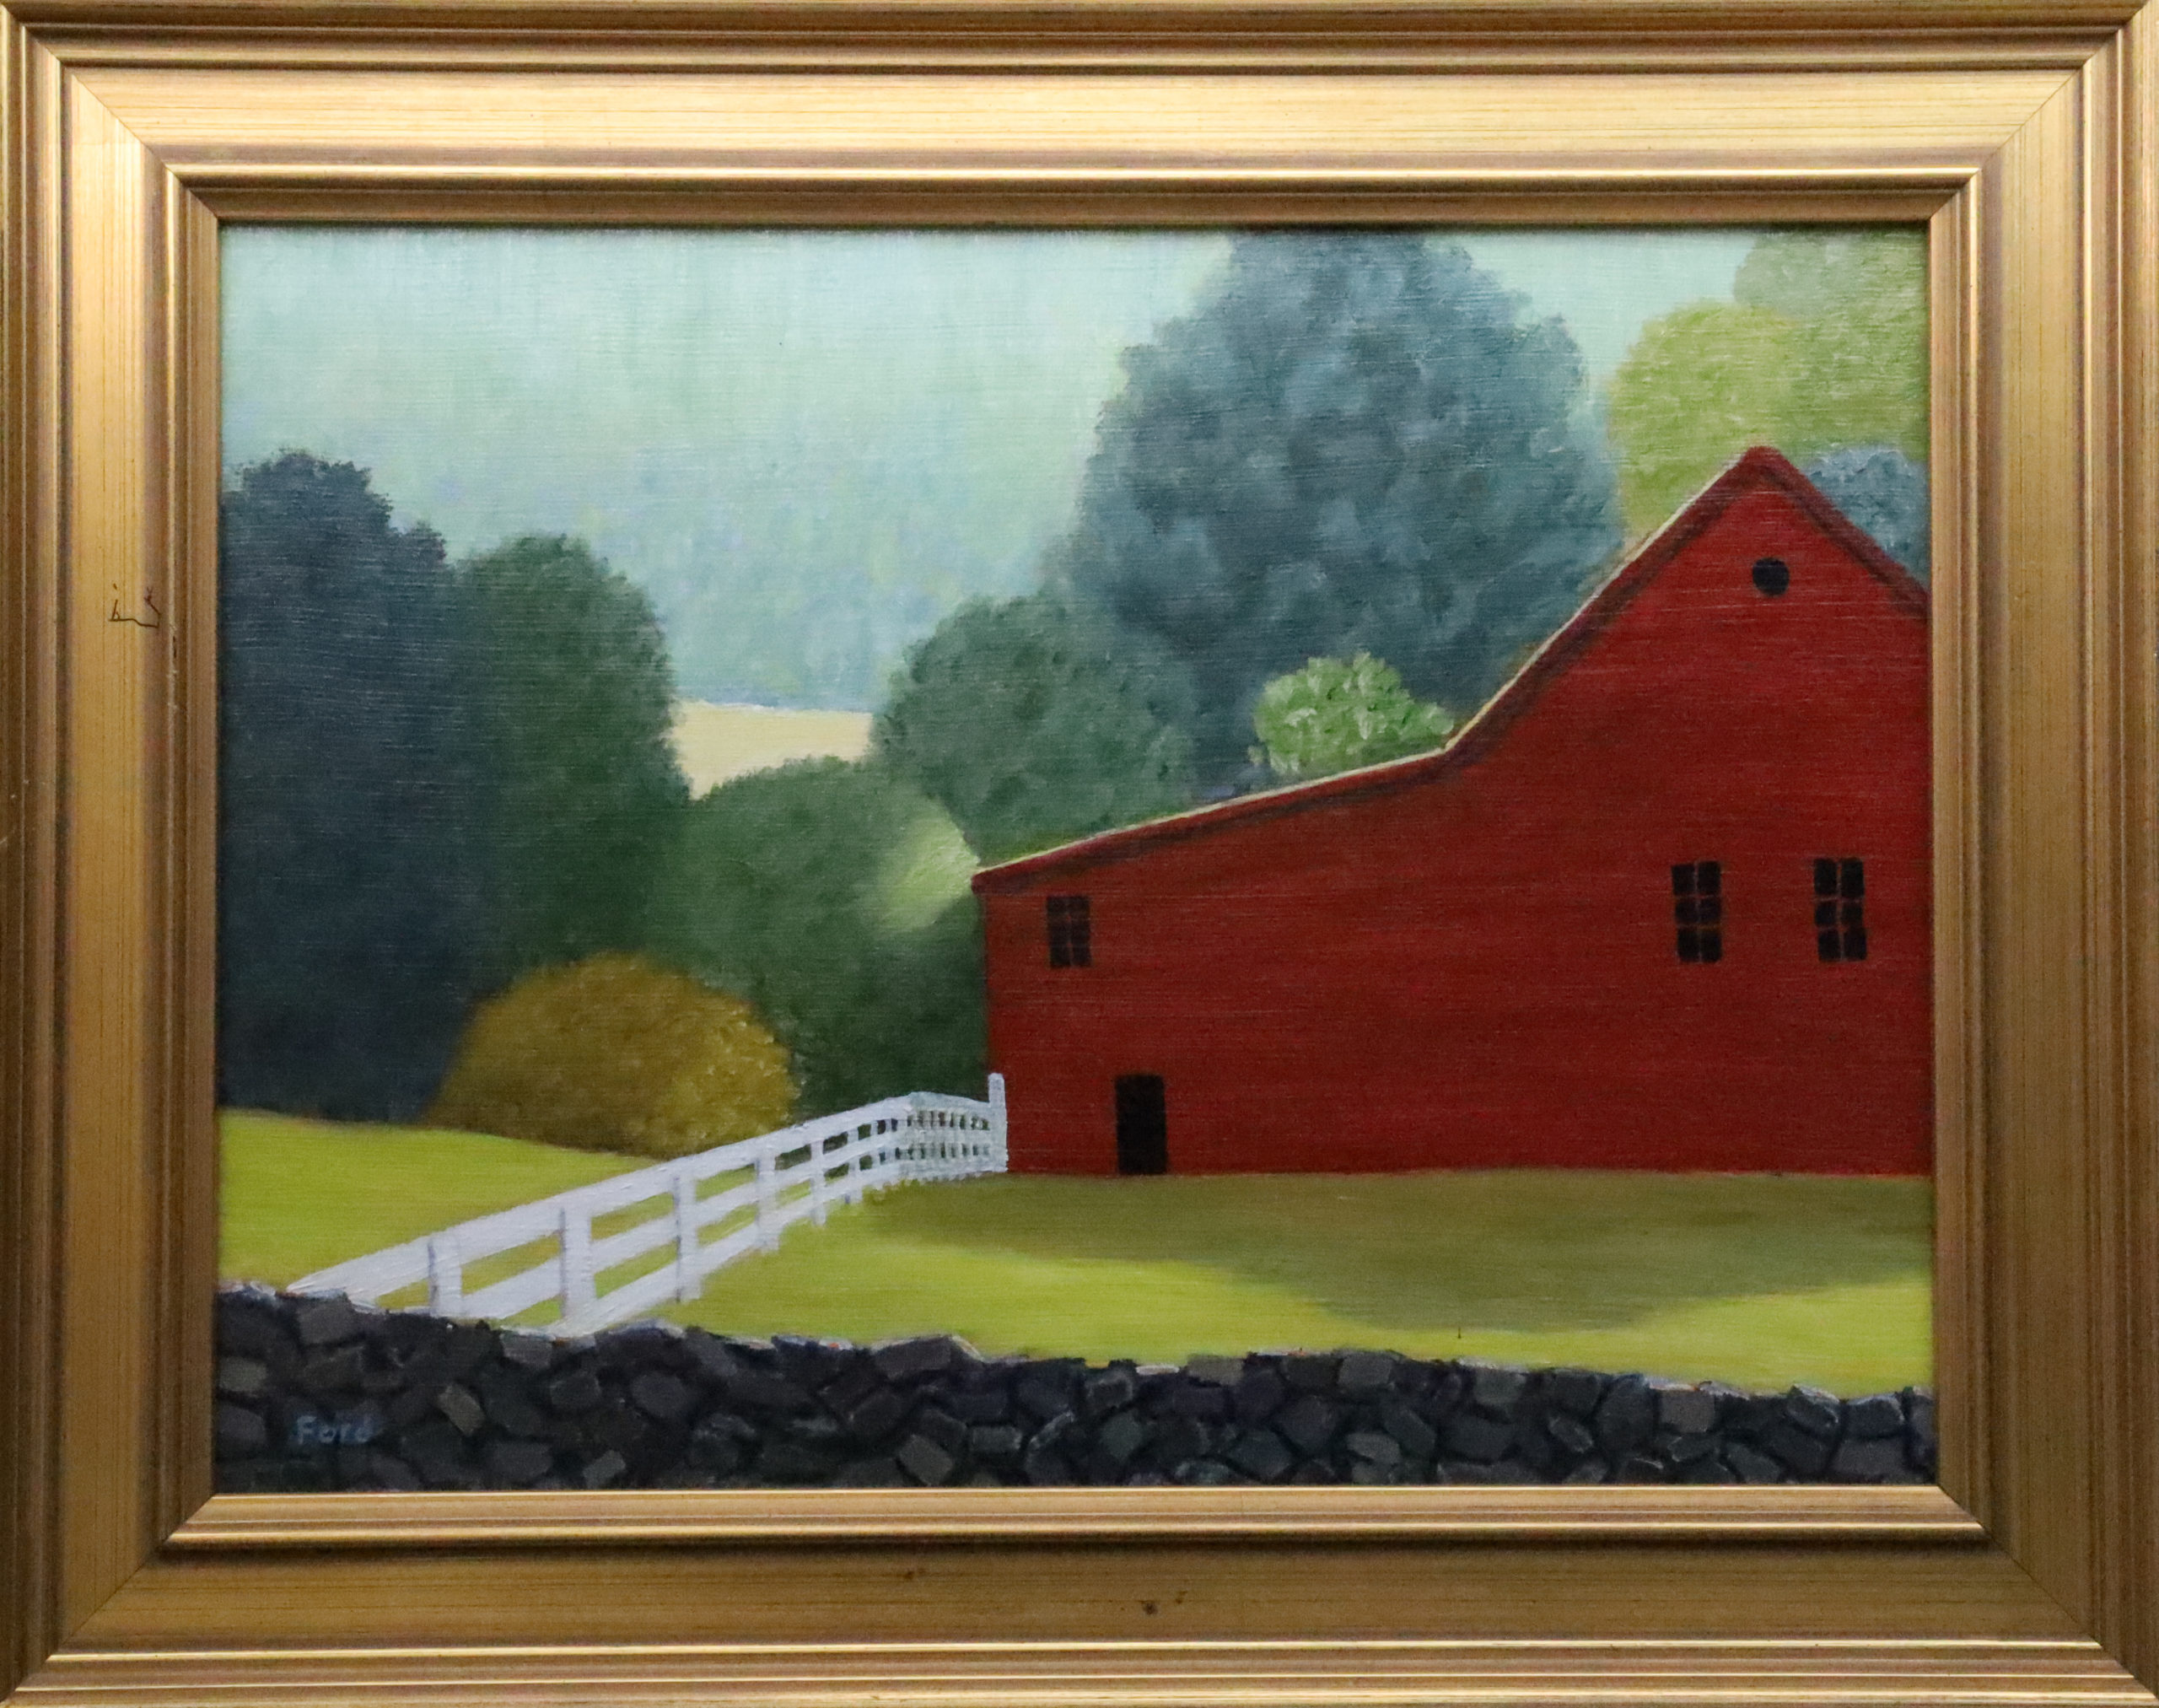 Painting of a Red Barn and a White Fence